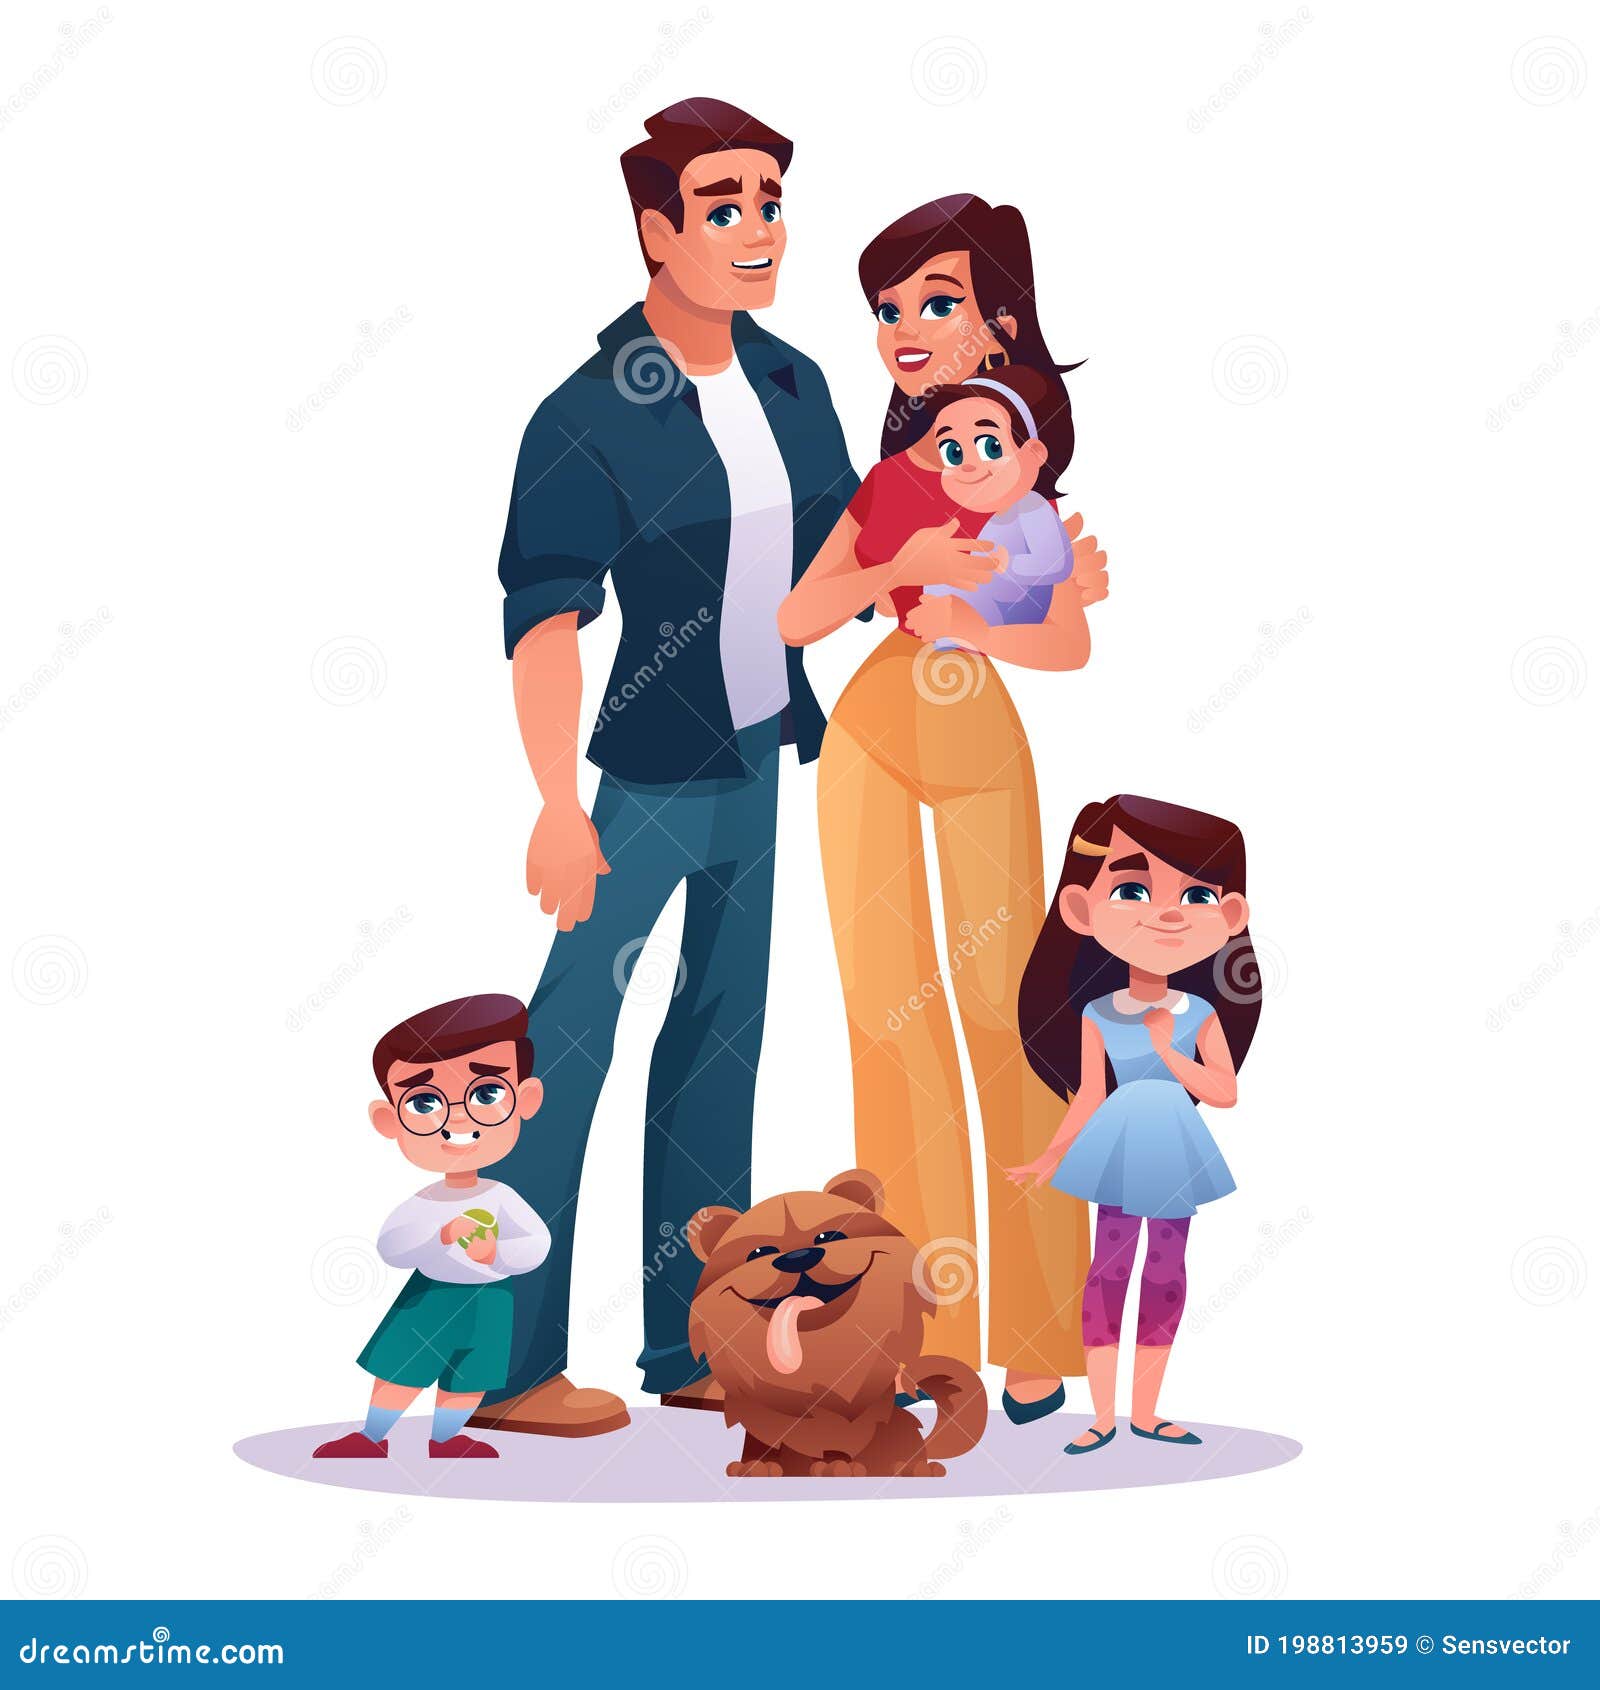 Daughter Incest Porn Cartoon Girl - Family Mother Father Two Daughters Stock Illustrations â€“ 91 Family Mother  Father Two Daughters Stock Illustrations, Vectors & Clipart - Dreamstime